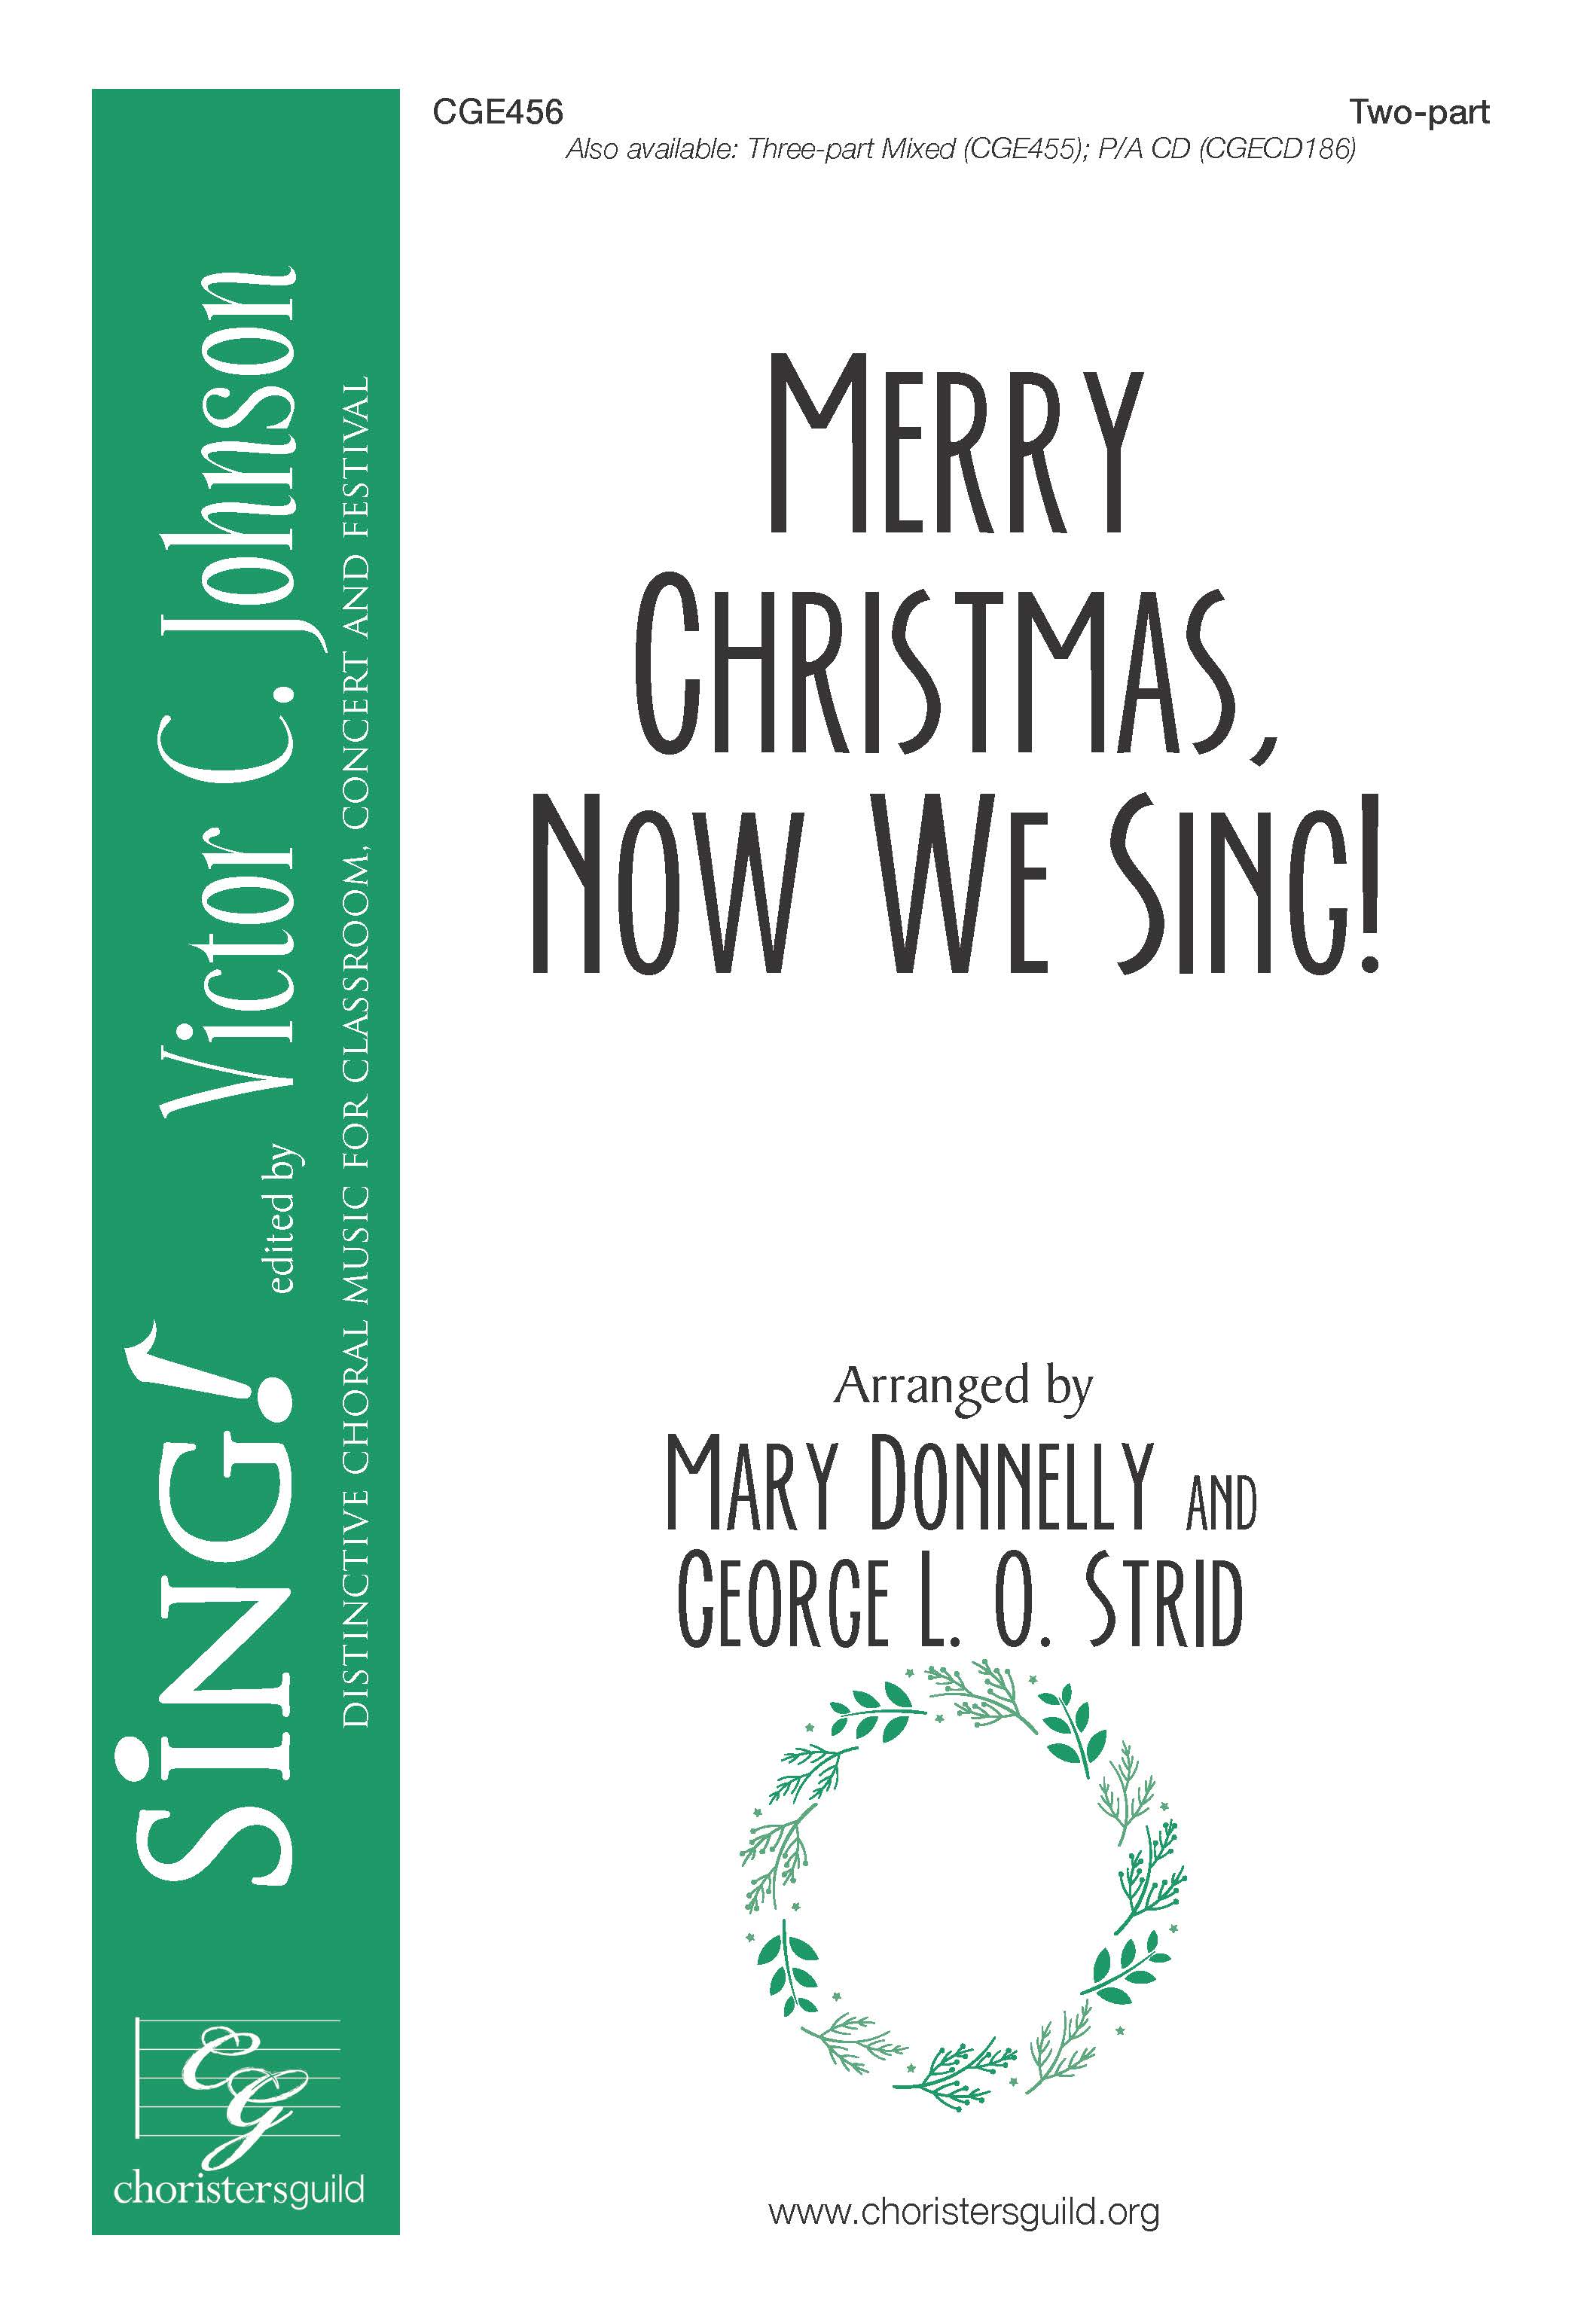 Merry Christmas, Now We Sing - Two-part